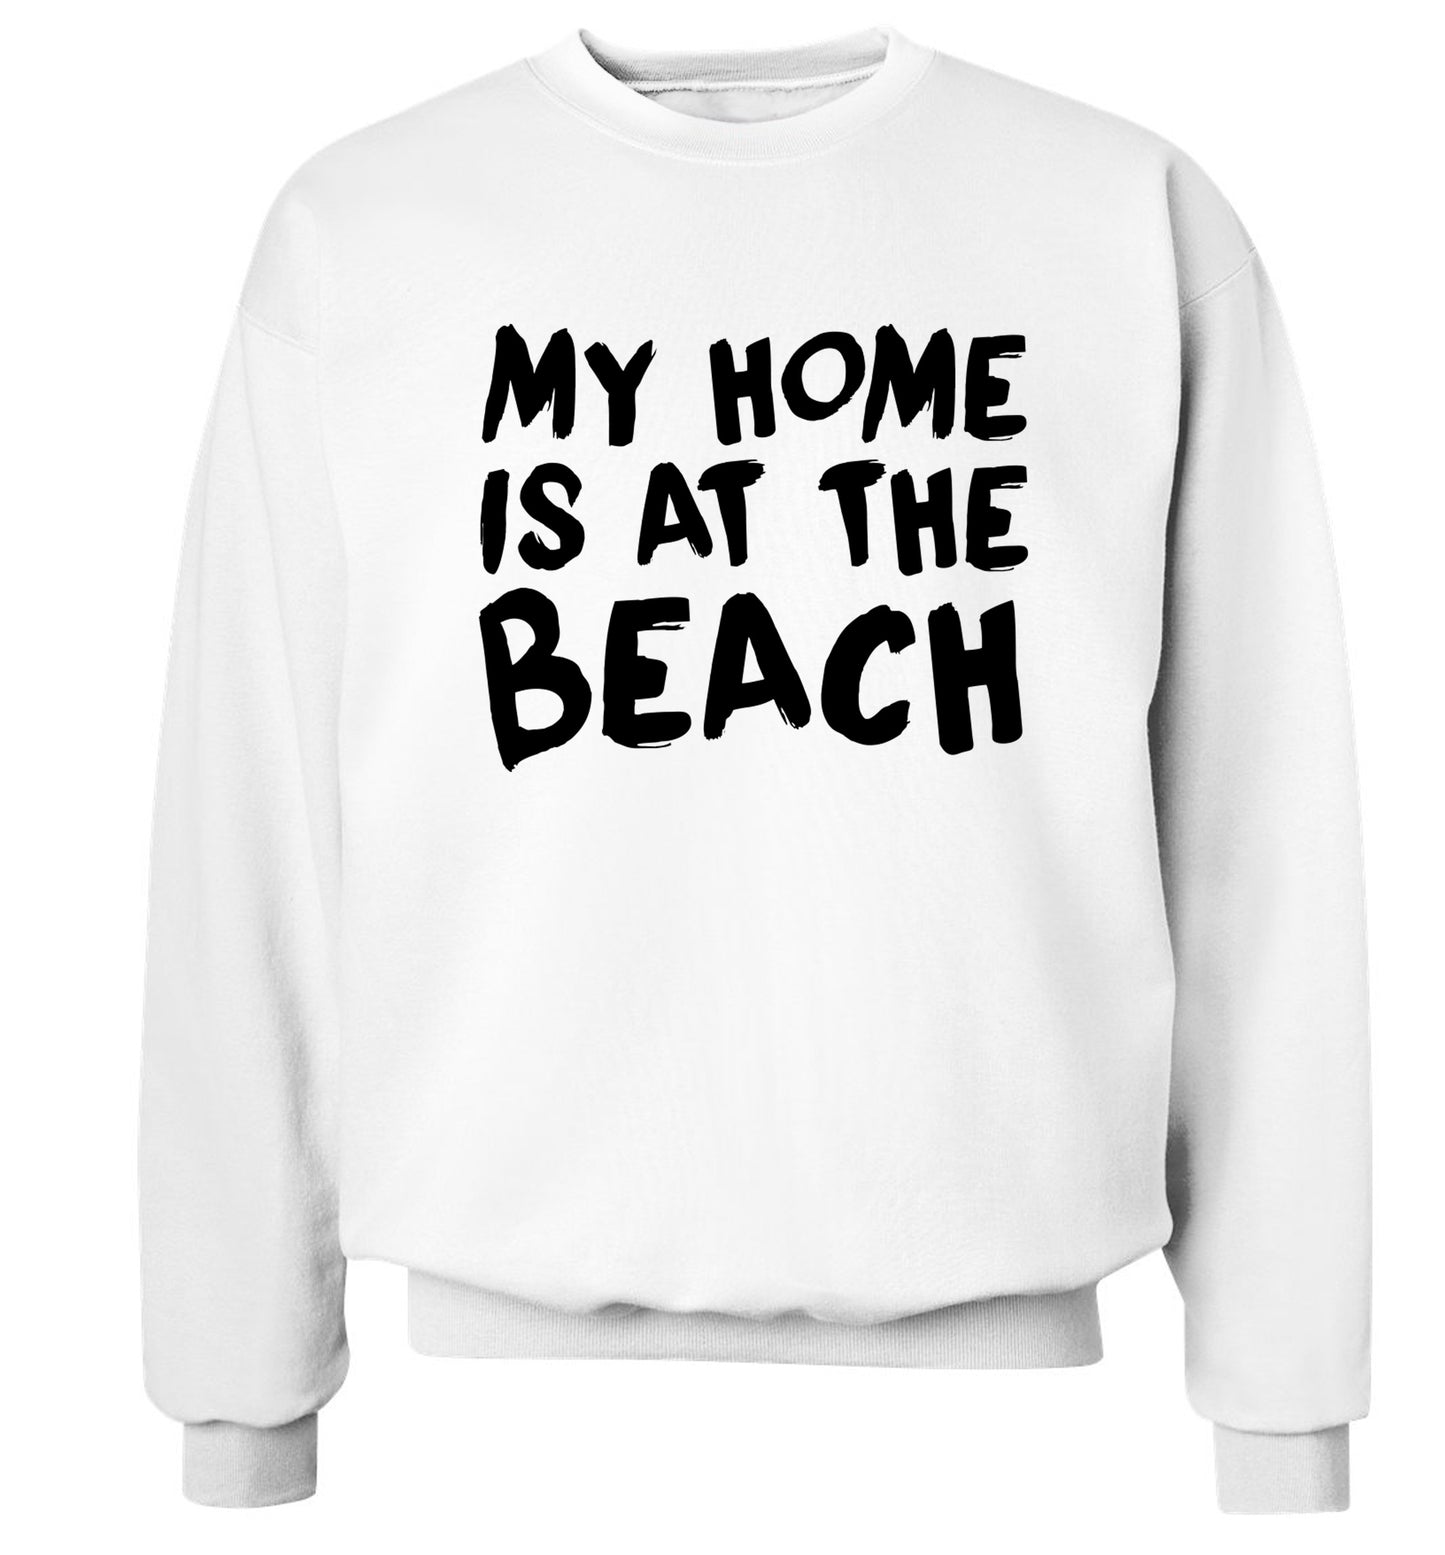 My home is at the beach Adult's unisex white Sweater 2XL